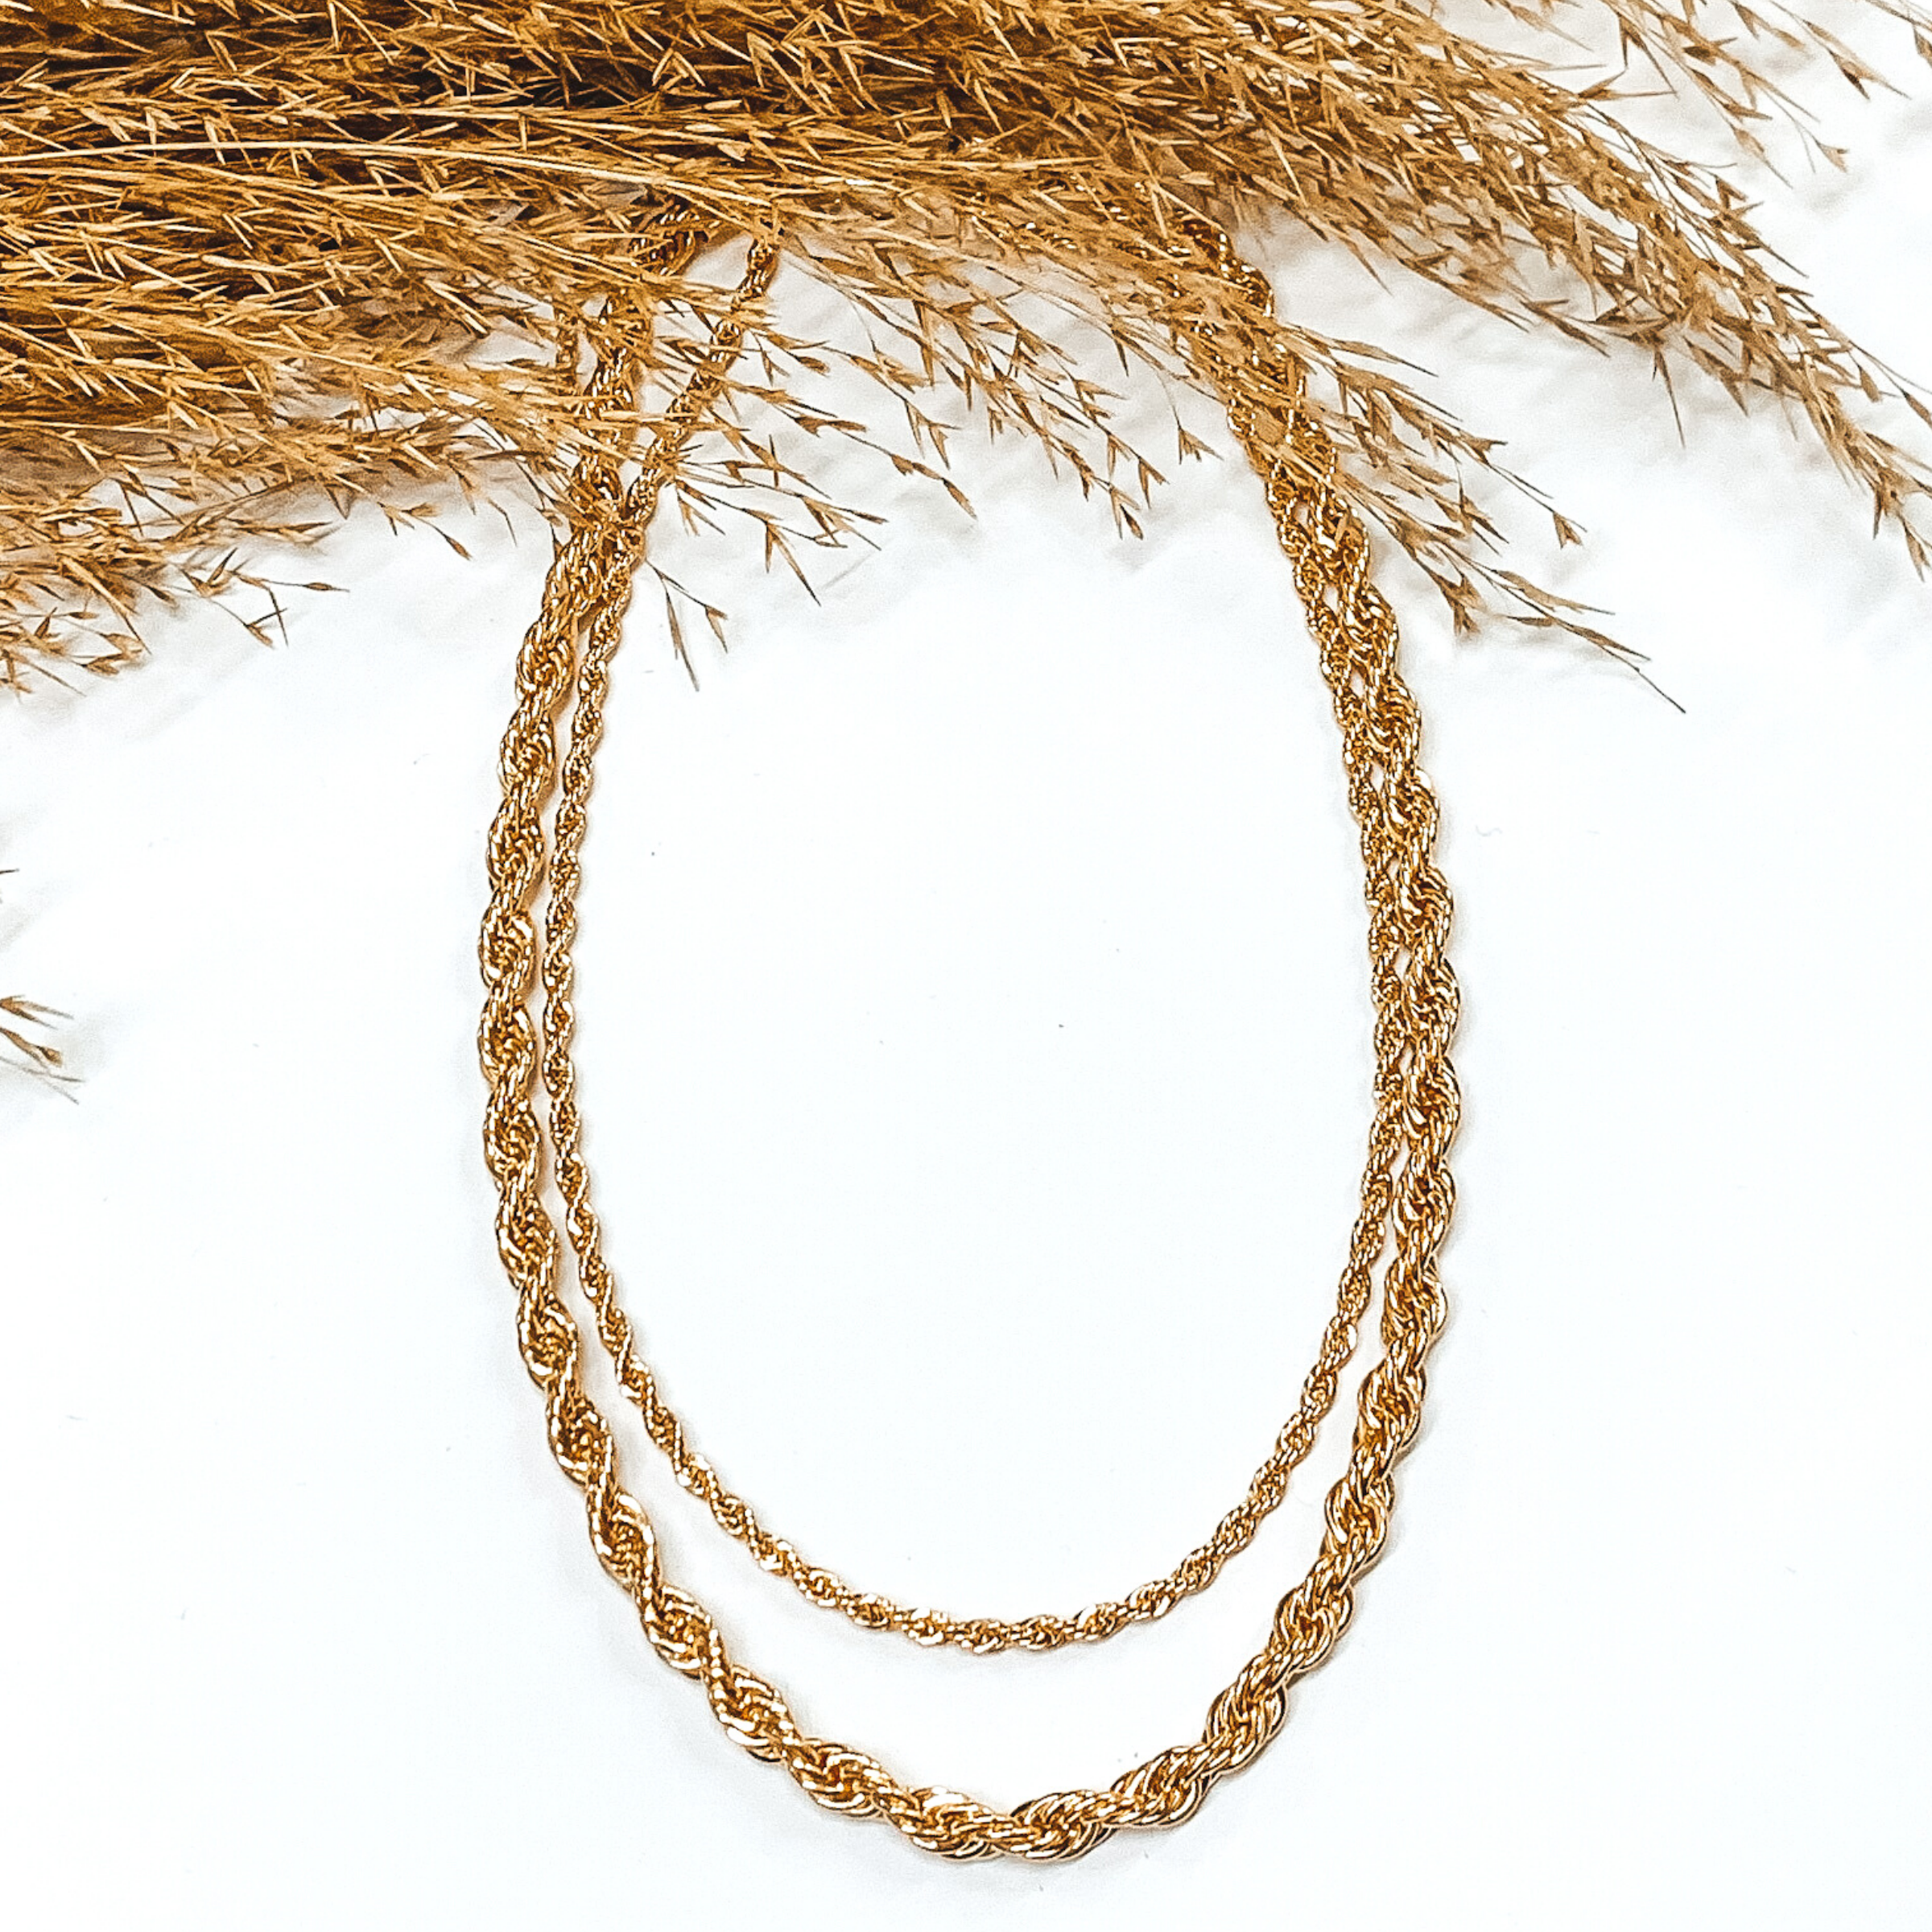 Double layered gold rope chain necklace. This necklace is pictured on a white background with tan floral at the top of the picture. 